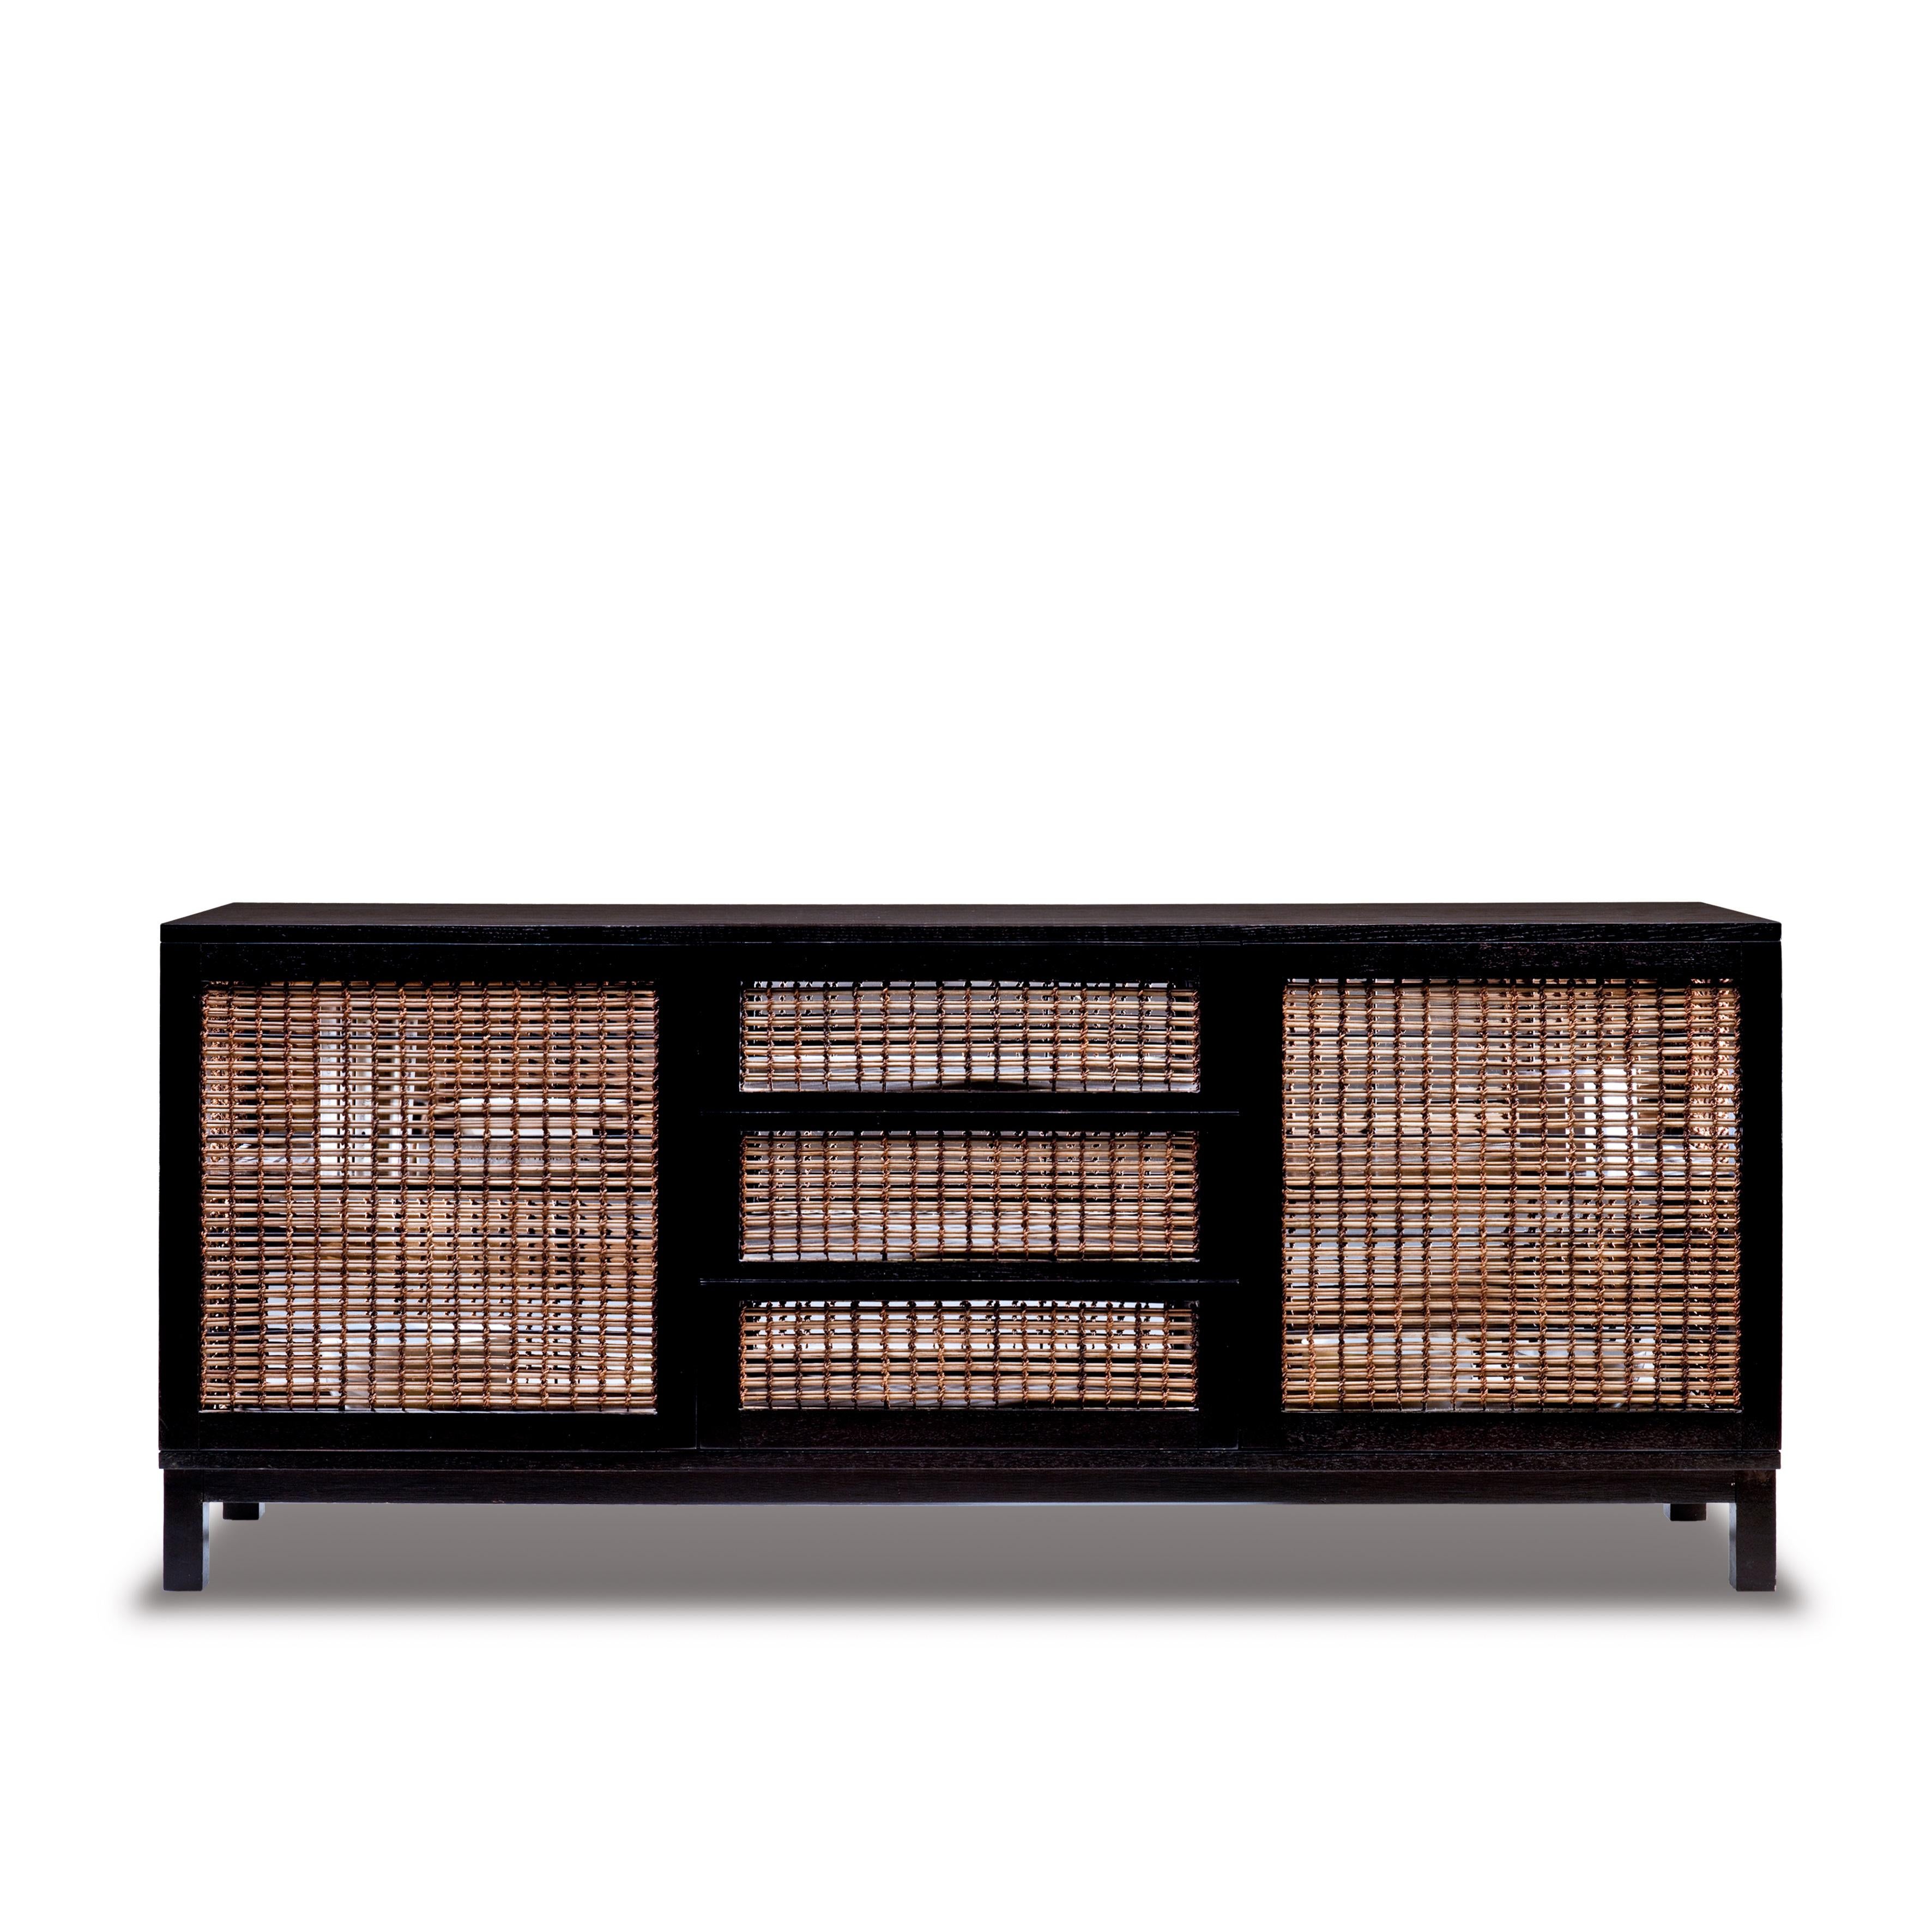 Maple suzy wong buffet cabinet by Kenneth Cobonpue.
Materials: abaca, rattan, maple. 
Also available in walnut.
Dimensions: 50 cm x 180 cm x H 77 cm.

Woven panels create a feeling of intimacy as you and your guests indulge in conversation or